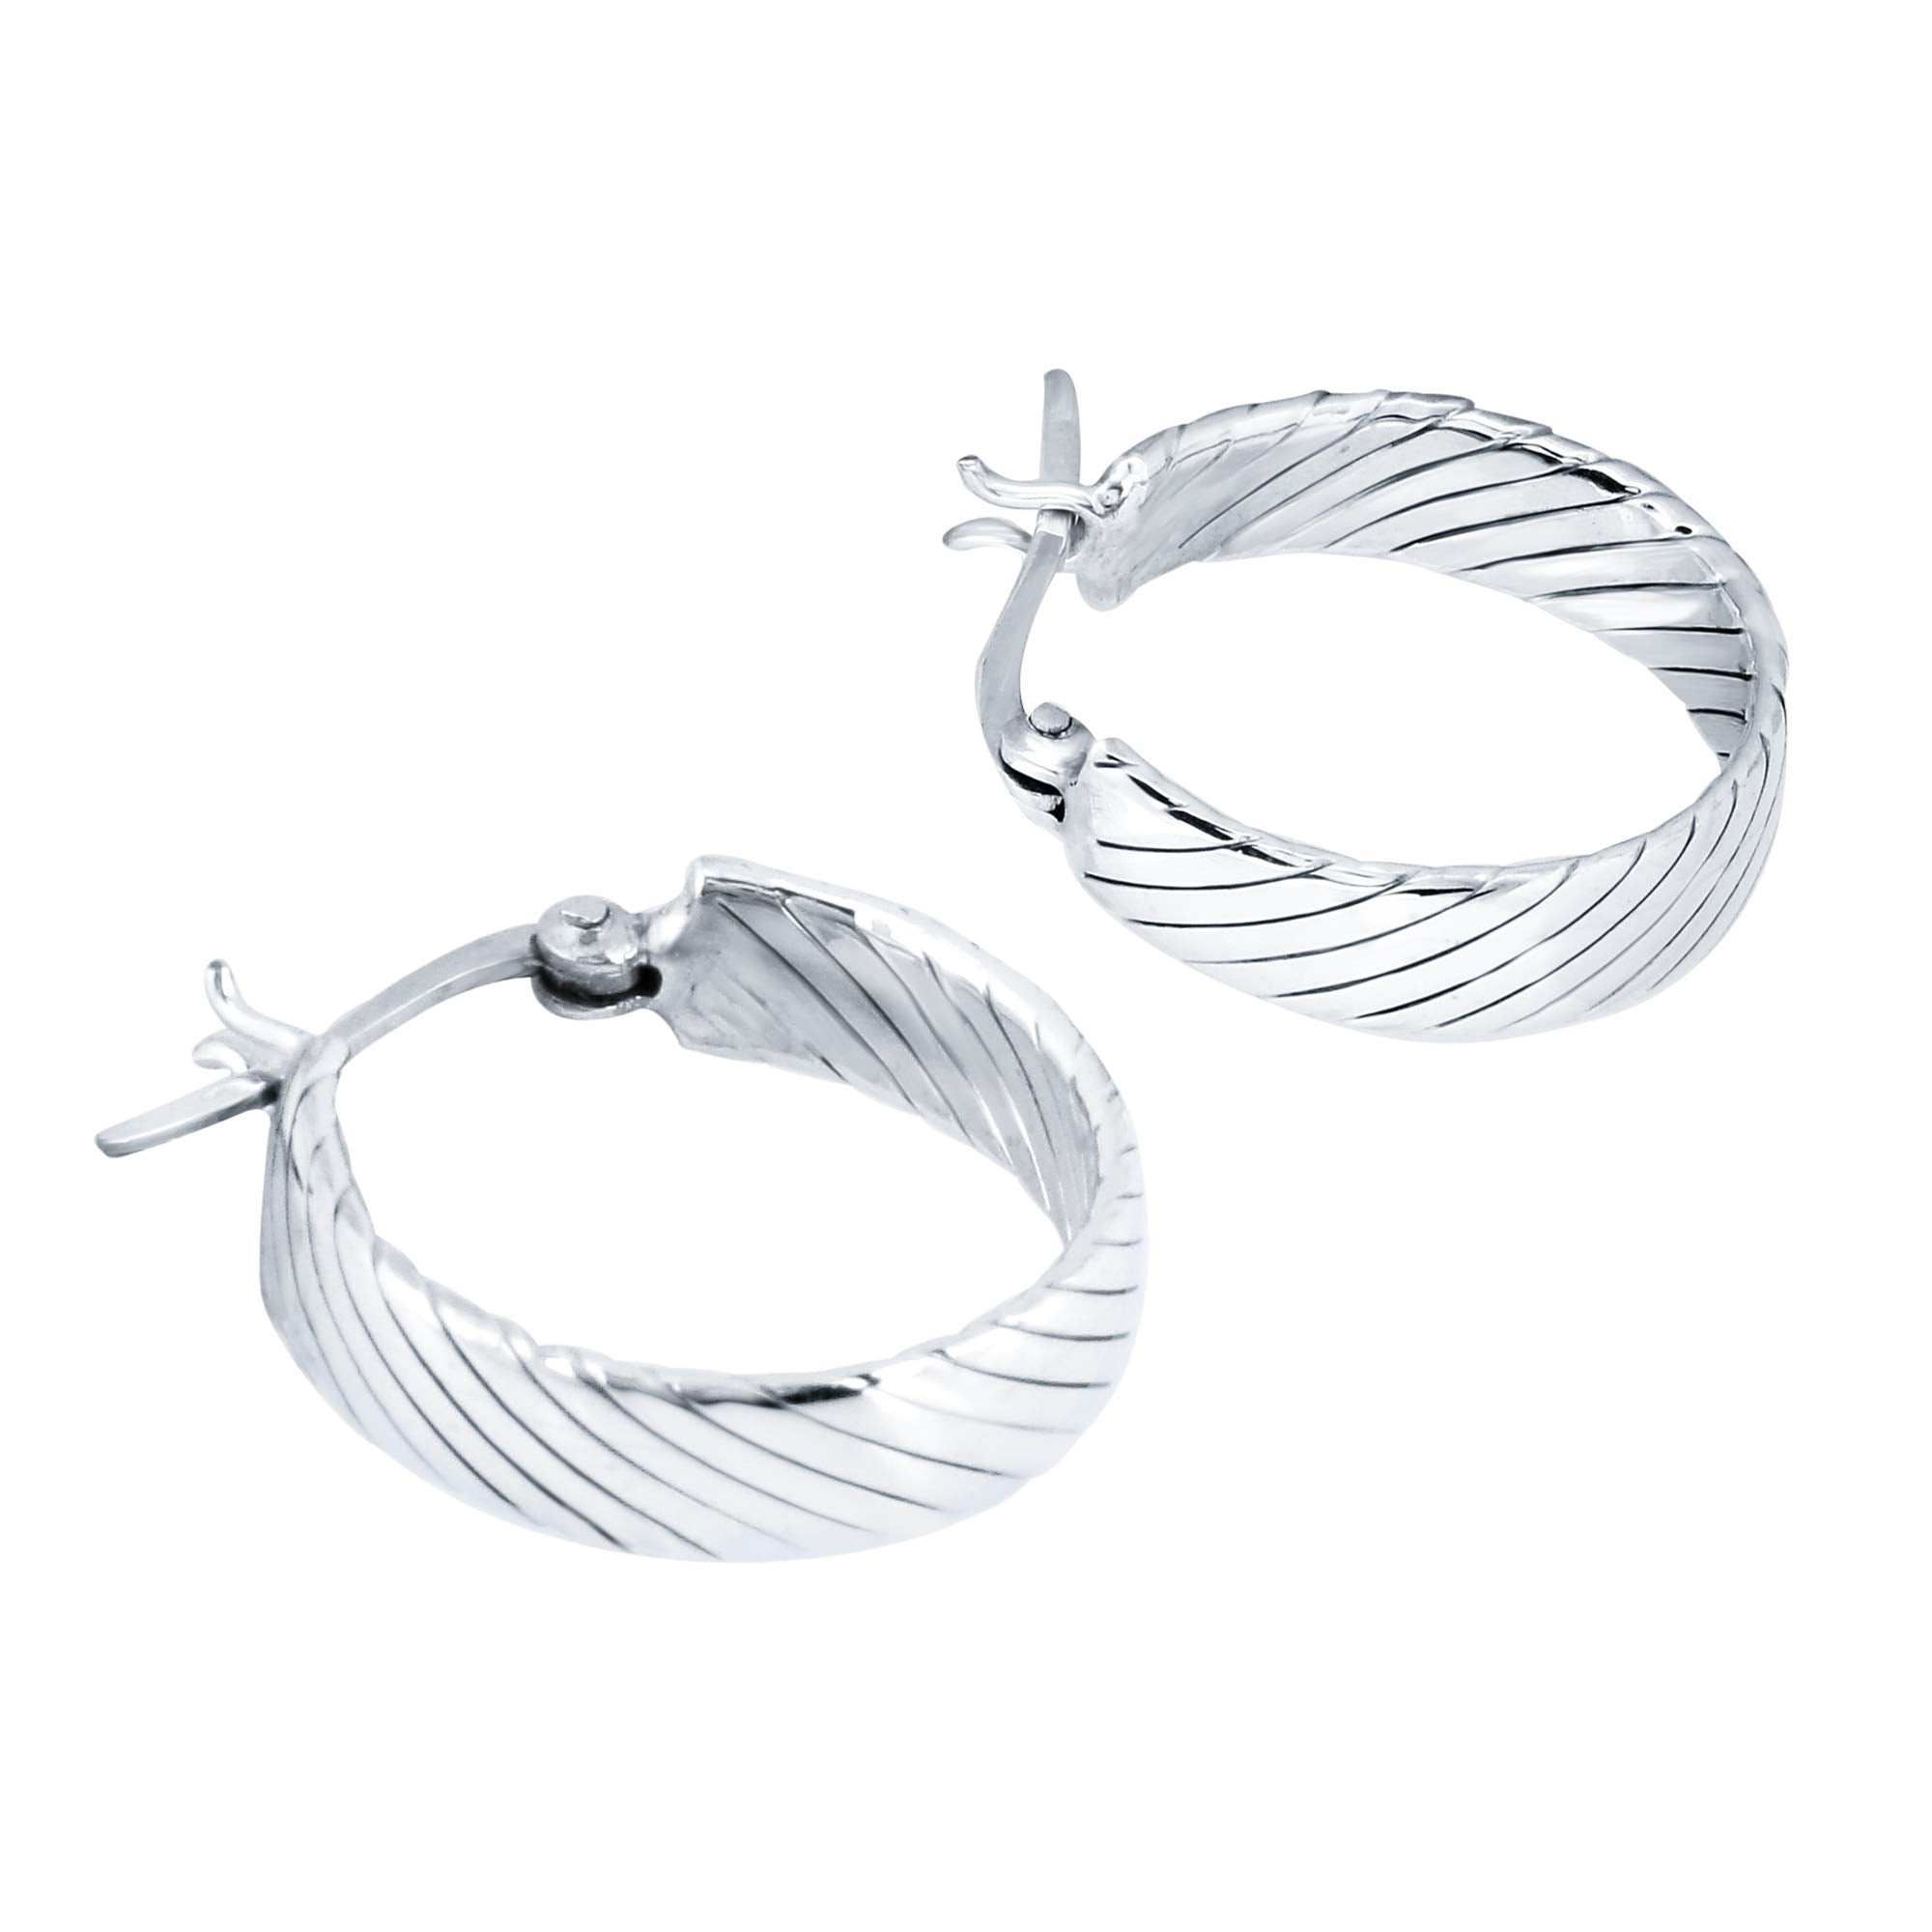 Yellow Chimes 925 Sterling Silver Hallmark and Certified Purity Bali Hoops Earrings for Women and Girls